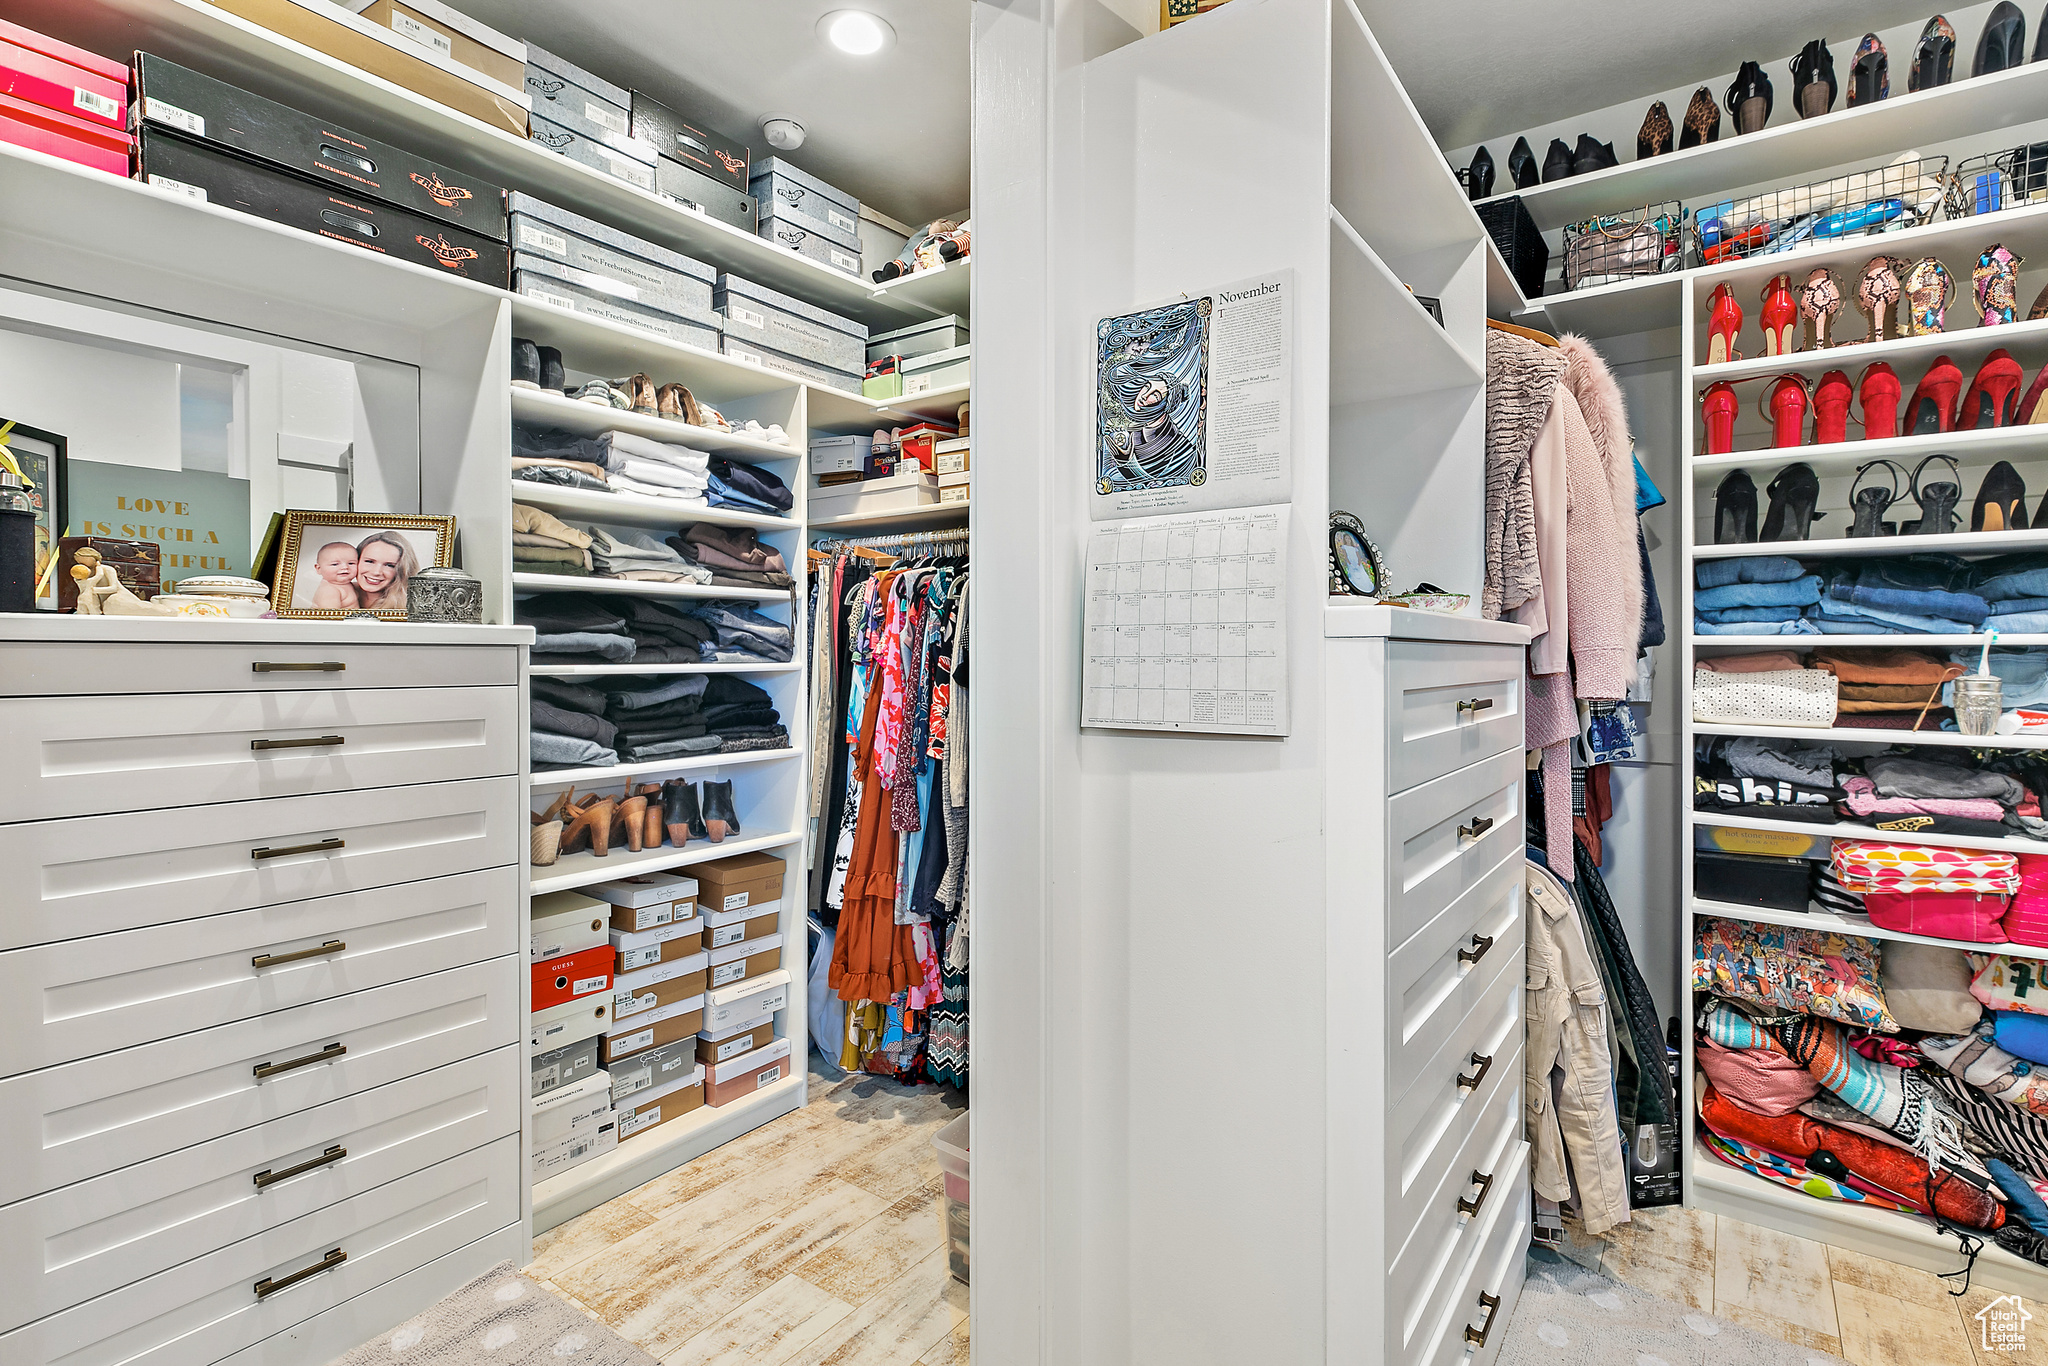 Primary Walk in closet with built-in dressers